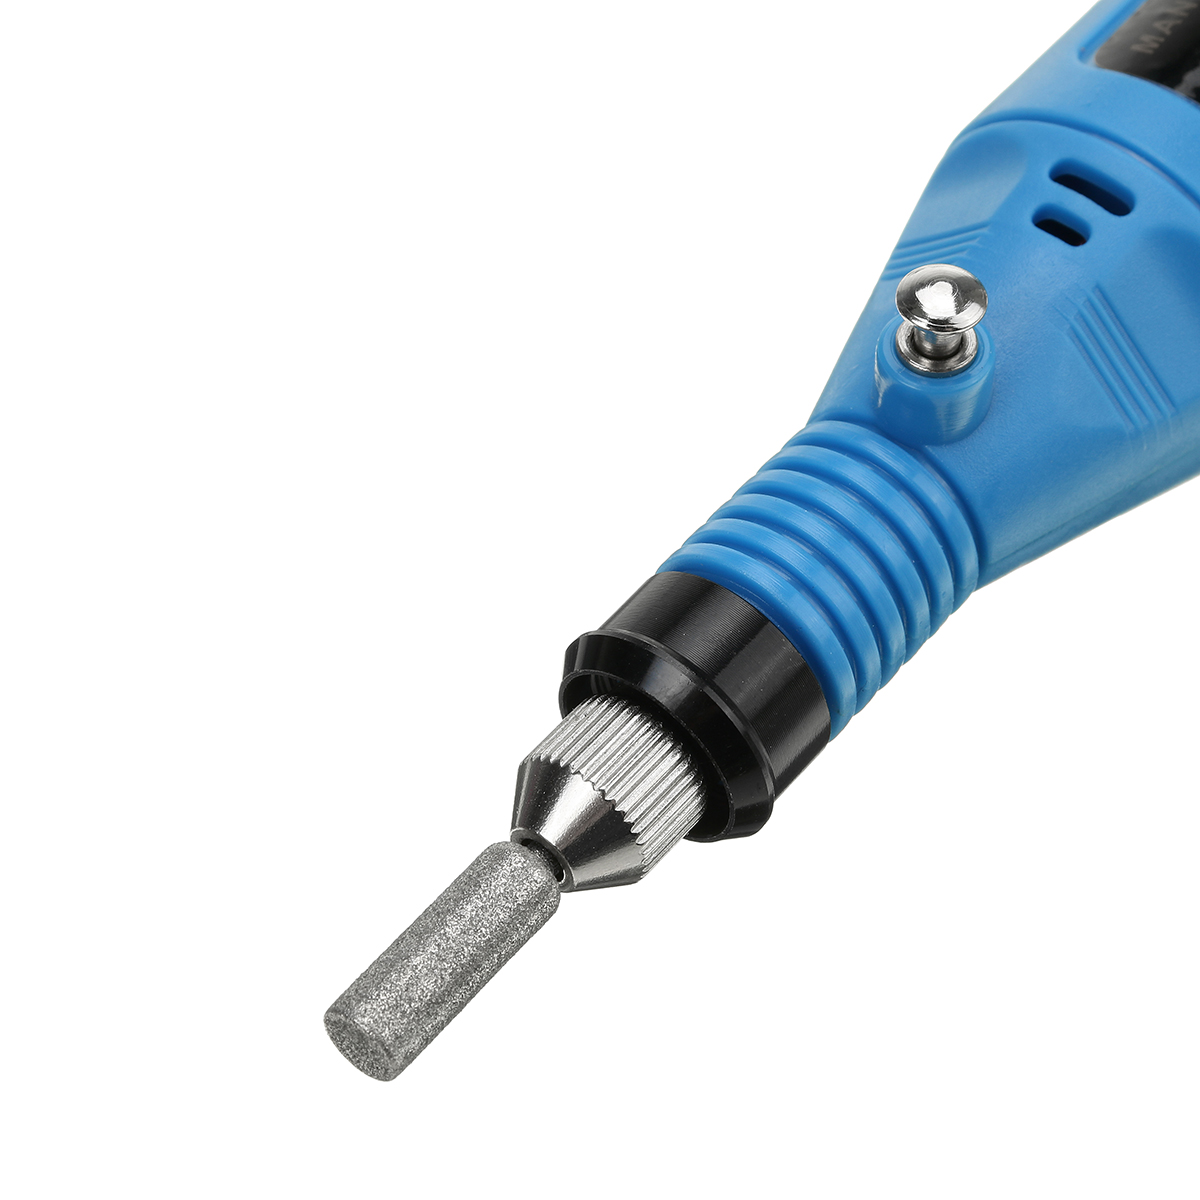 Adjustable-Electric-Drill-Grinder-Engraver-Pen-Mini-Drill-Electric-Rotary-Tool-Grinding-Machine-1818672-7